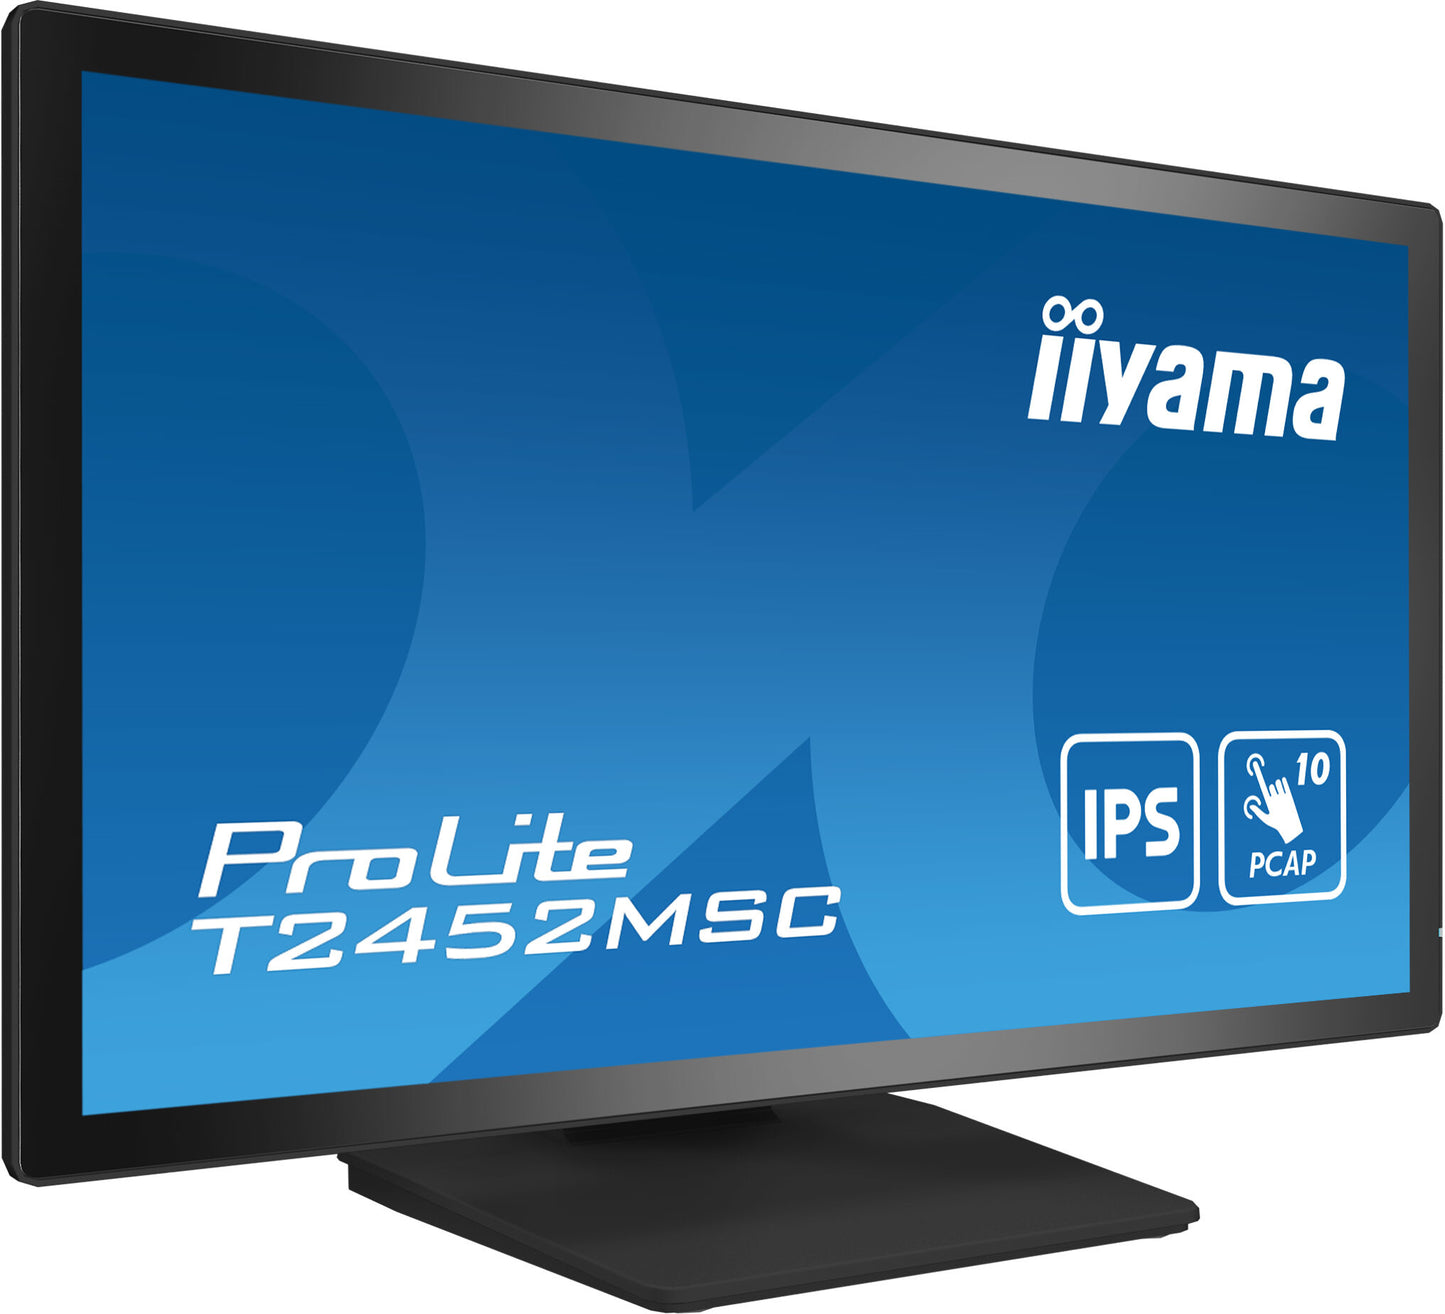 24" IPS Bonded PCAP, 10P Touch with Anti-Finger print coating, 1920x1080, Flat Bezel Free Glass Fron